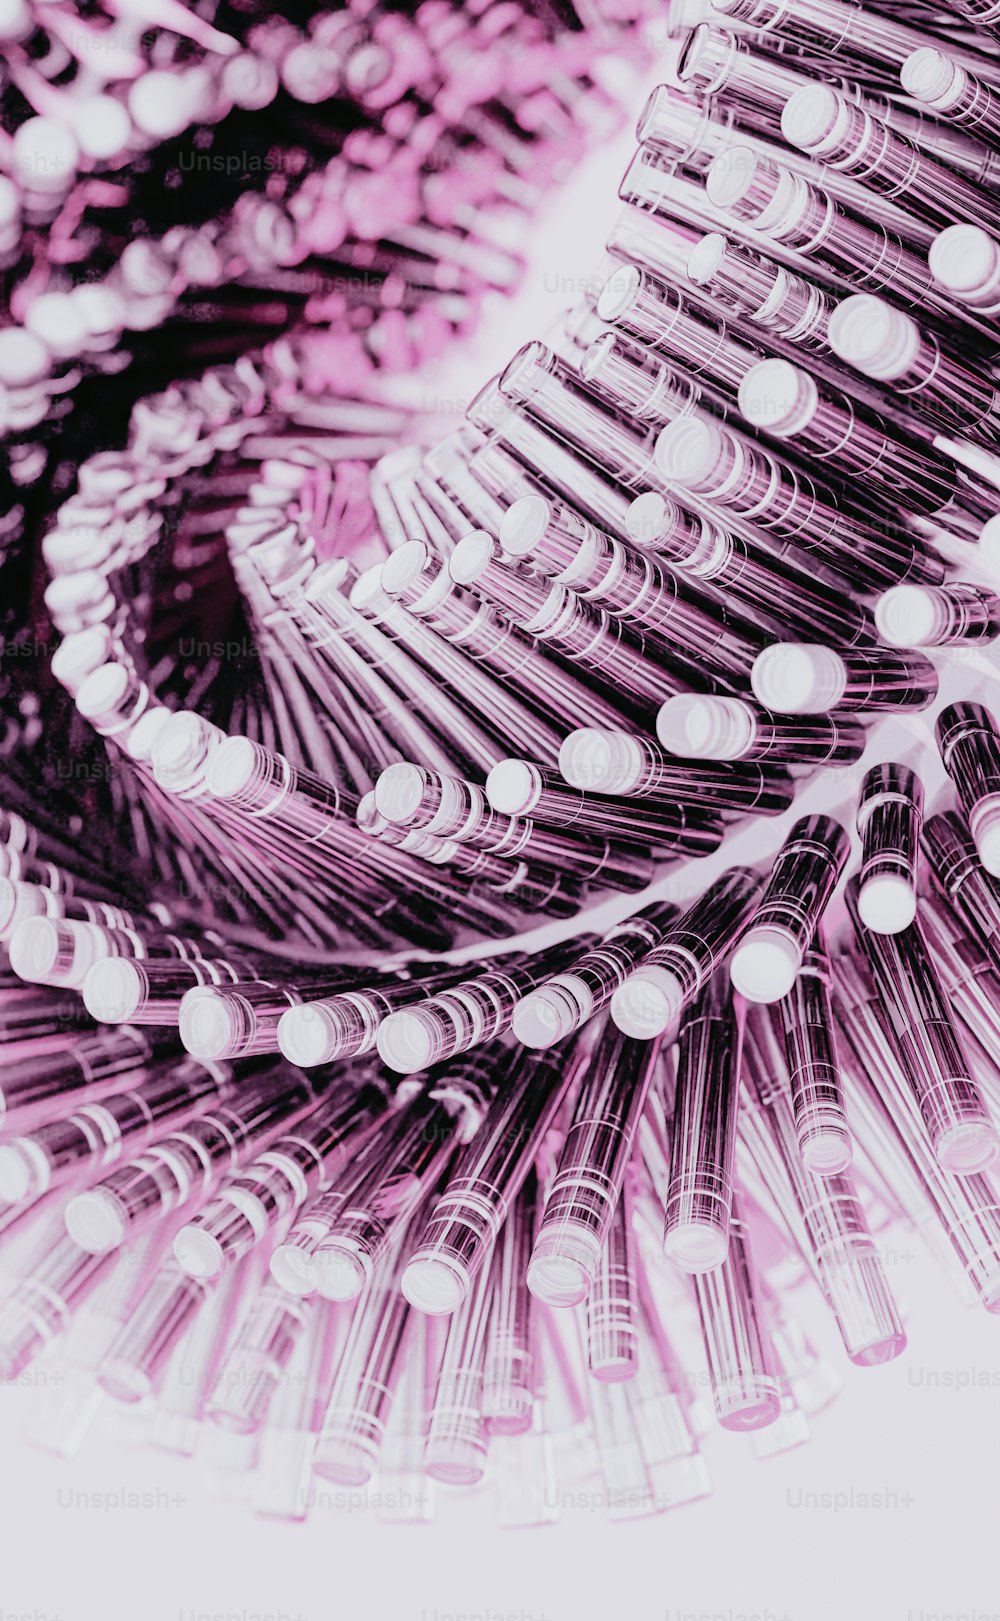 a close up of a bunch of toothbrushes